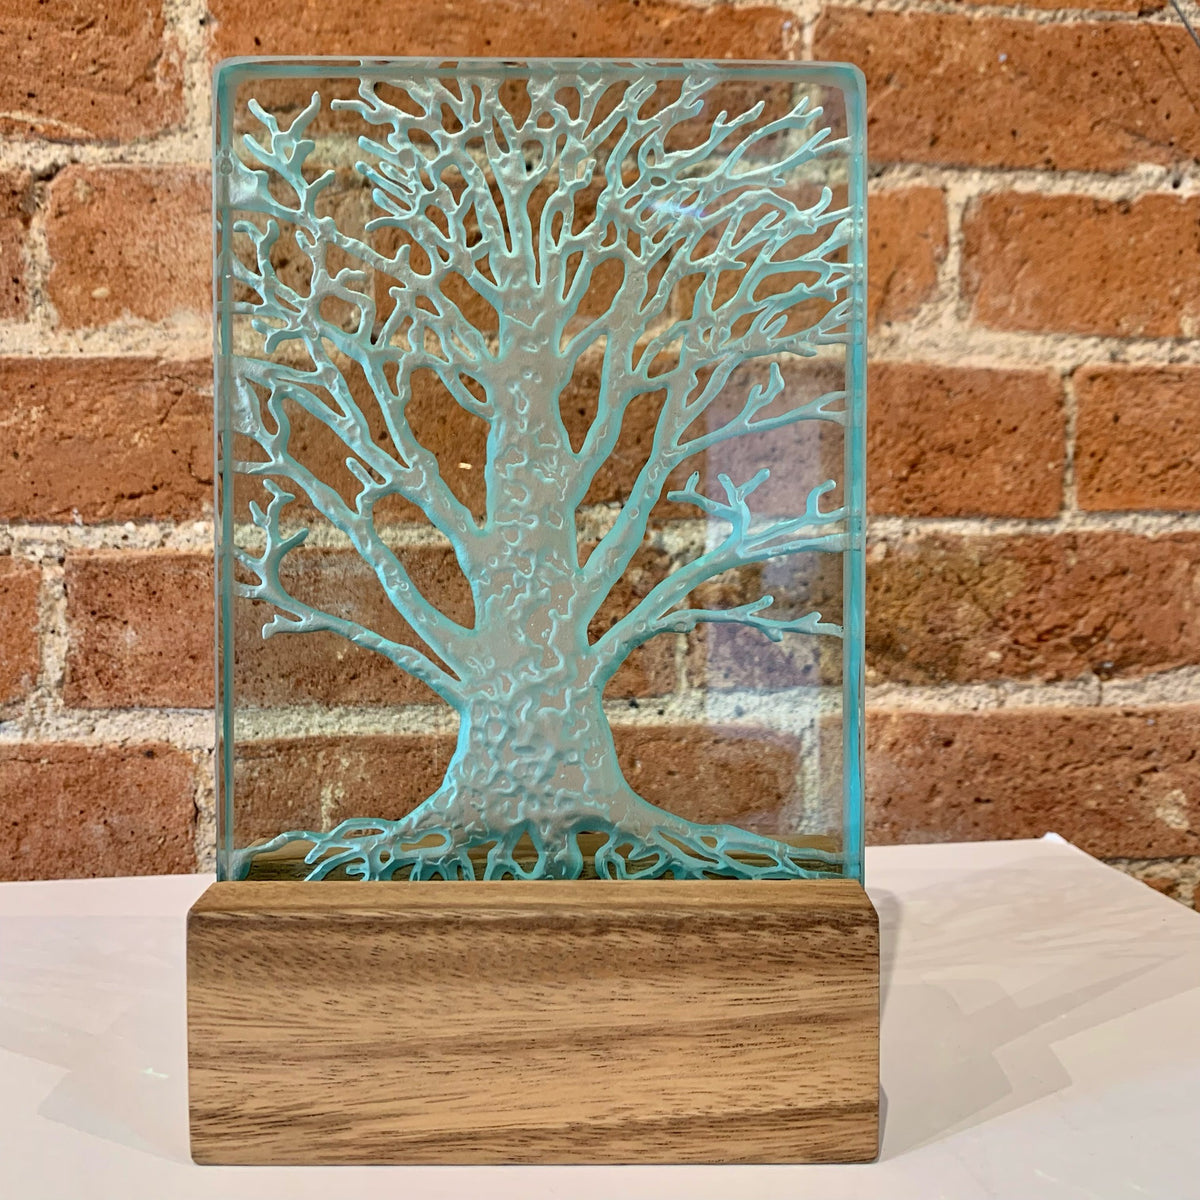 Etched glass light up tree